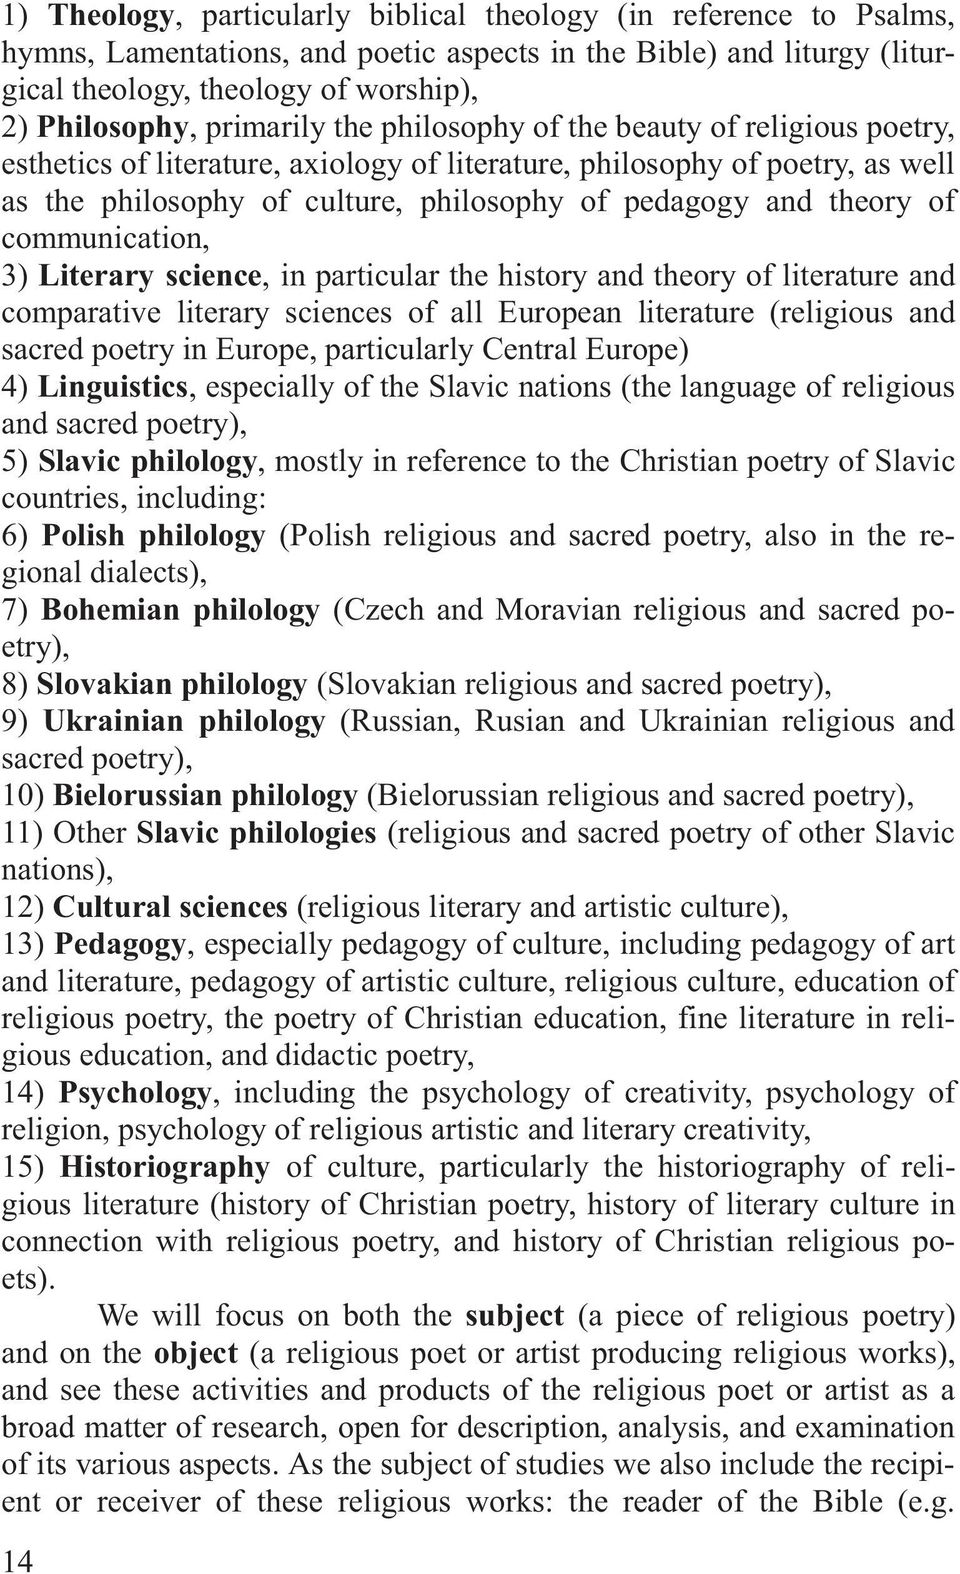 theory of communication, 3) Literary science, in particular the history and theory of literature and comparative literary sciences of all European literature (religious and sacred poetry in Europe,